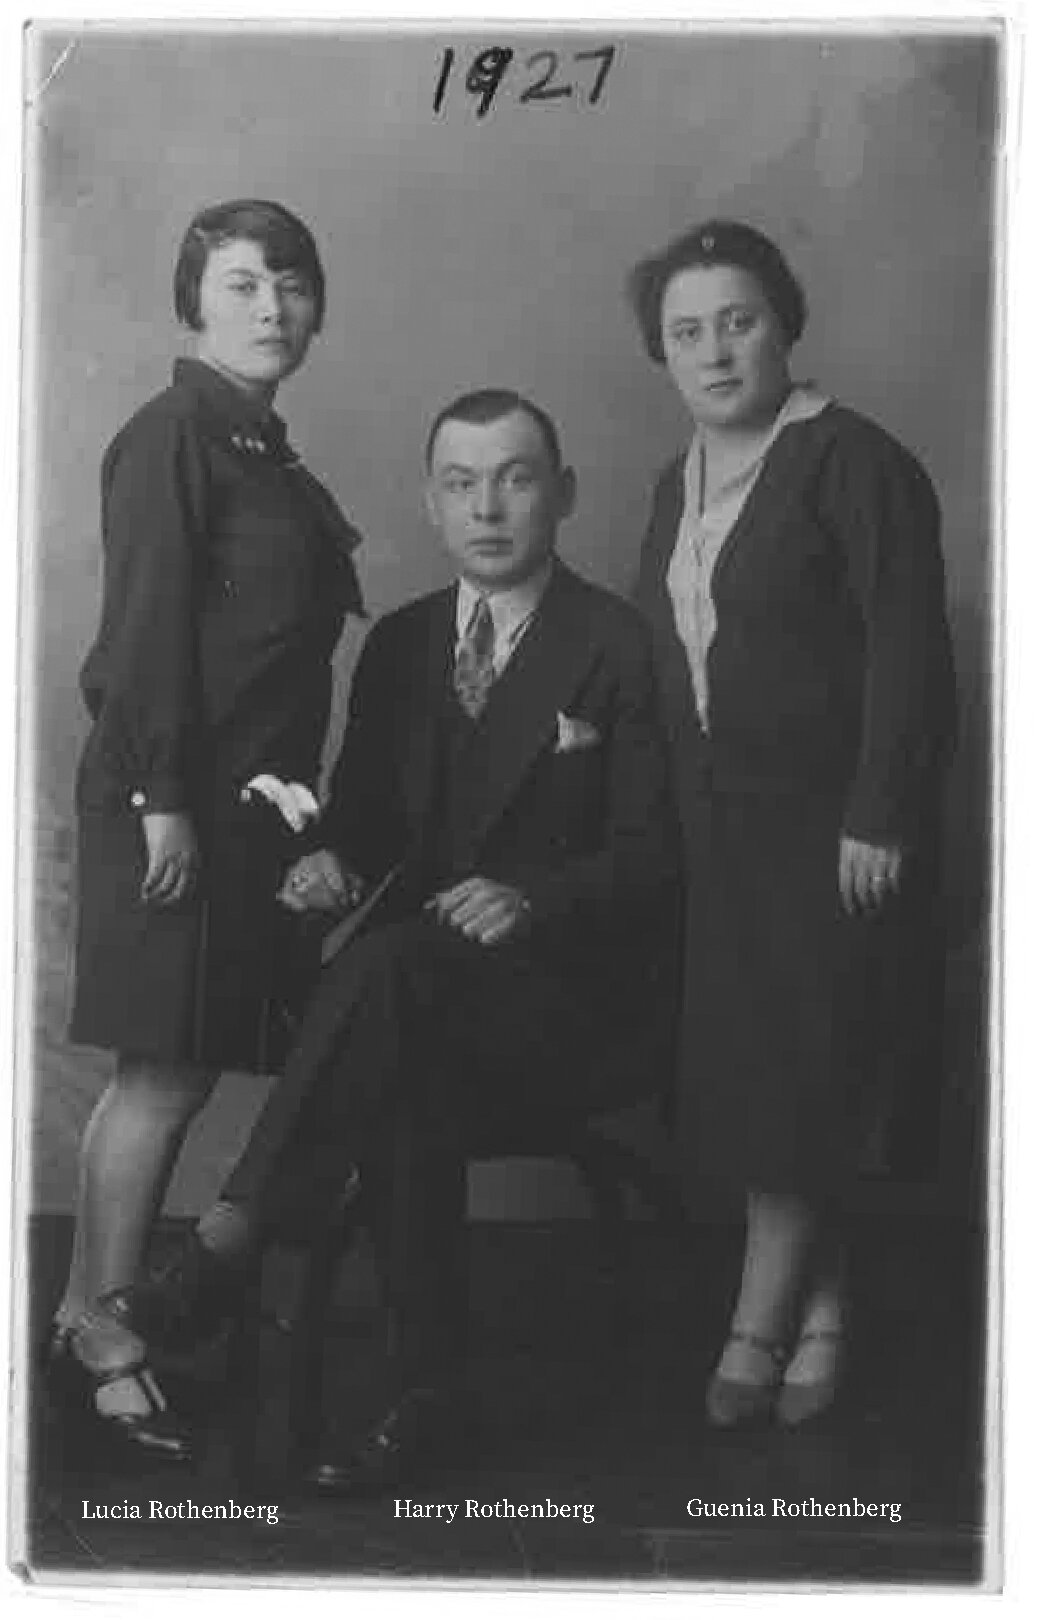 1927 Harry, Lucia and Guenia Rothenberg.jpg